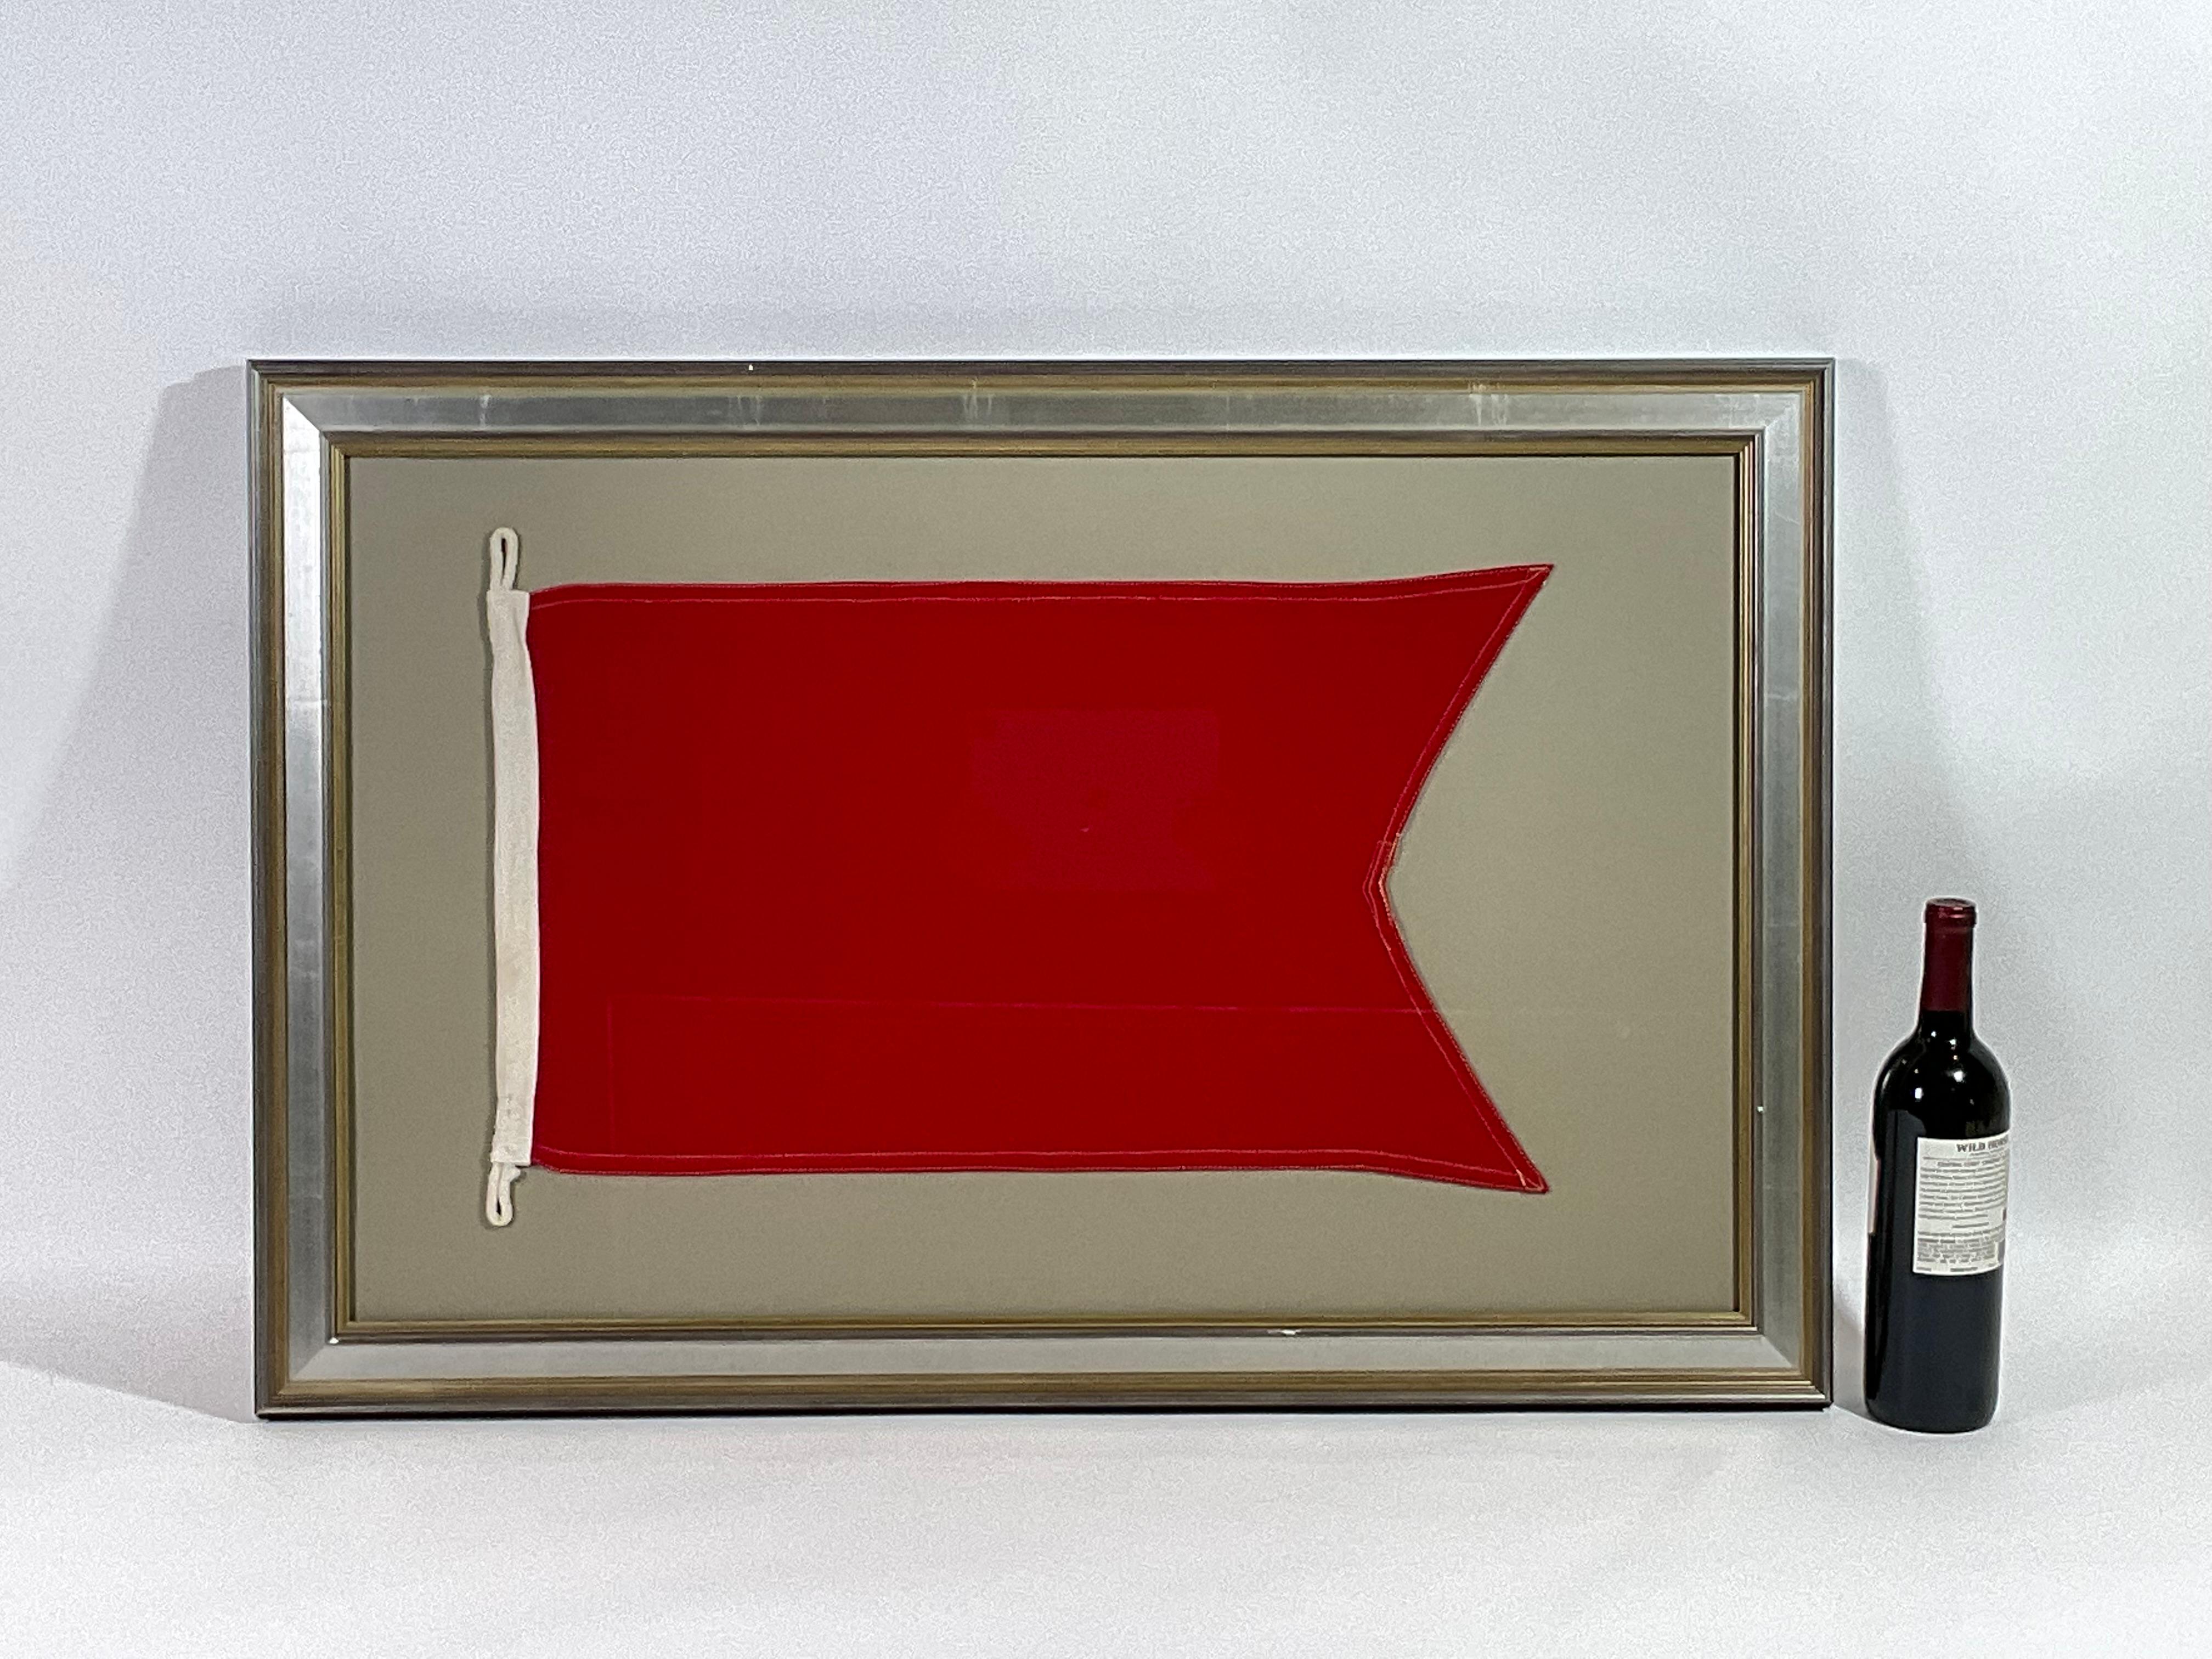 Framed maritime signal flag representing the letter “B” in the international code of signals. This authentic and ocean used pennant is made of an individual panel of red. Fitted to a heavy canvas hoist band with rigging tabs. This nautical relic is